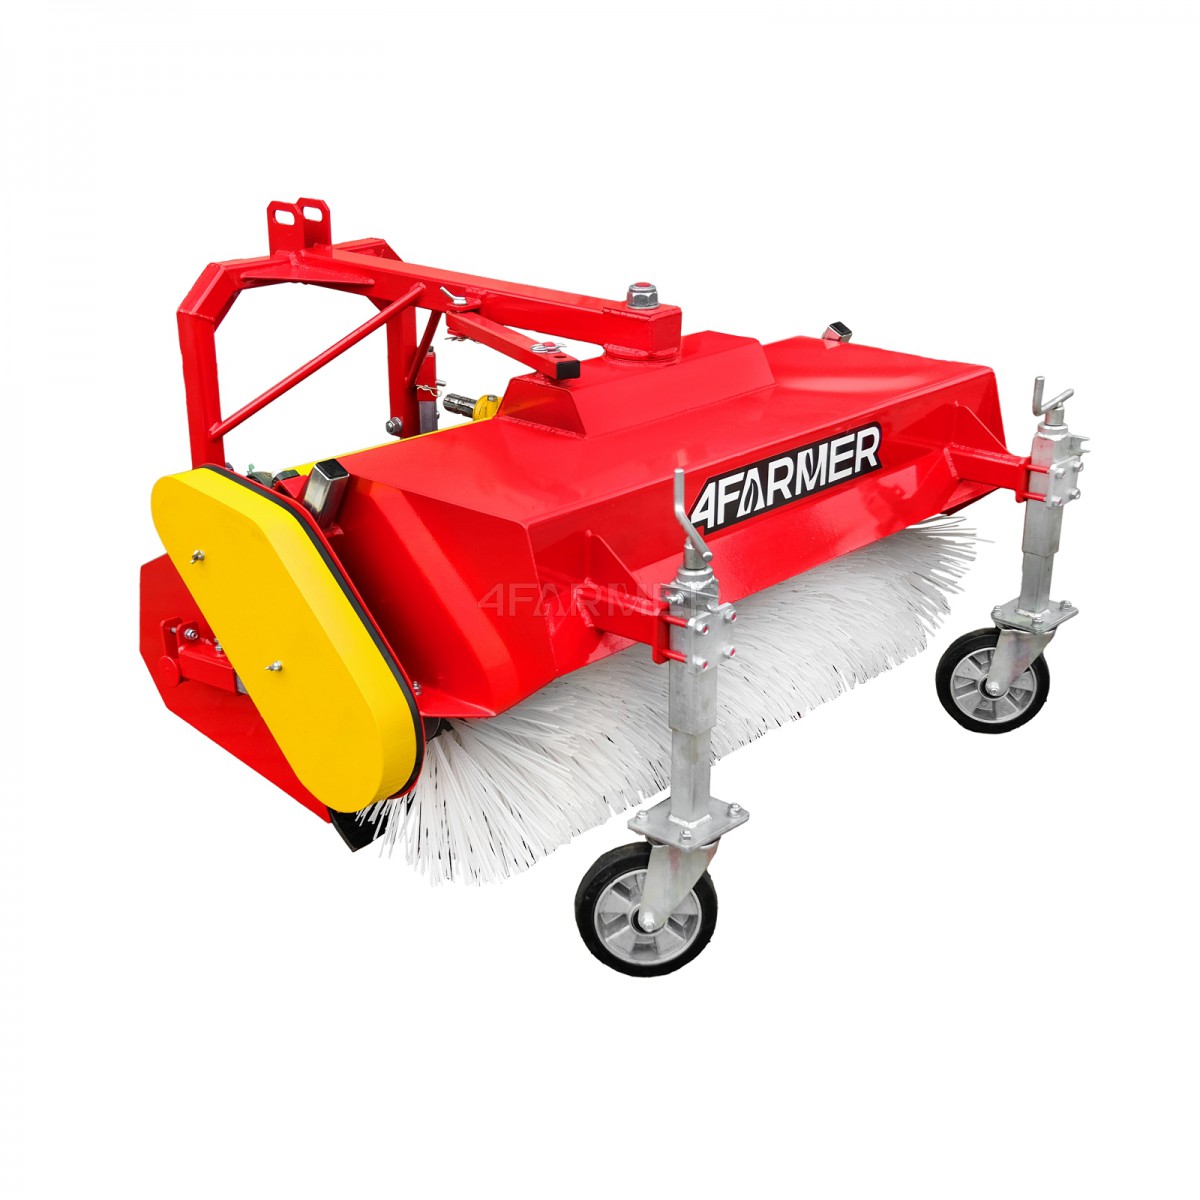 120 cm sweeper for the 4FARMER tractor with a basket